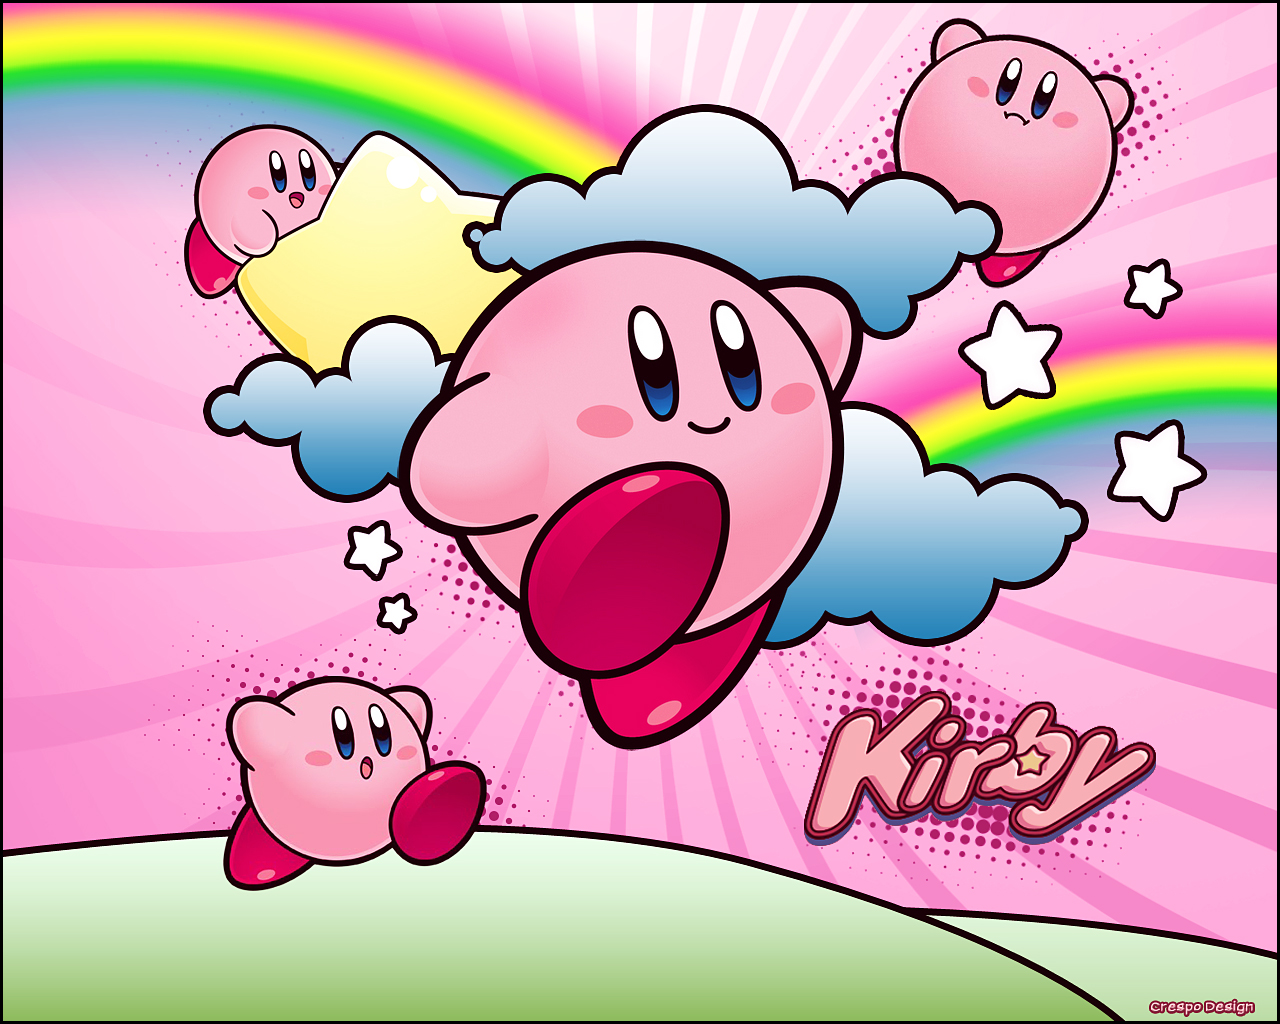 188004 1920x1080 Kirby  Rare Gallery HD Wallpapers